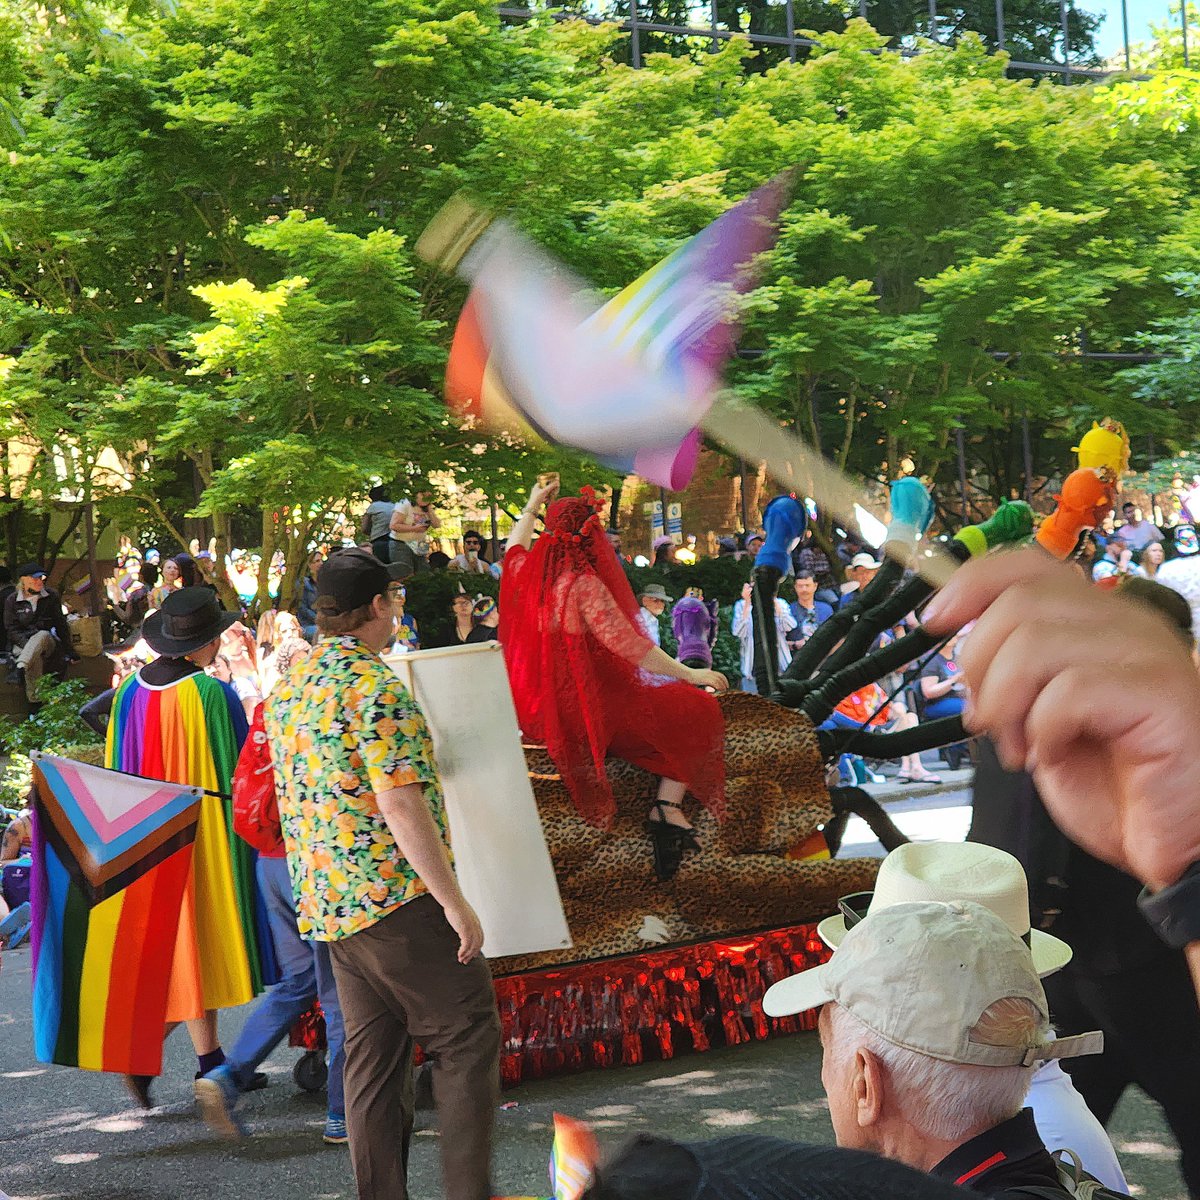 Babalon at #SeattlePride presented by the Horizon Lodge.  My phone's camera seemed obsessed with only working in time to get backsides today, but it was still a fabulous float.